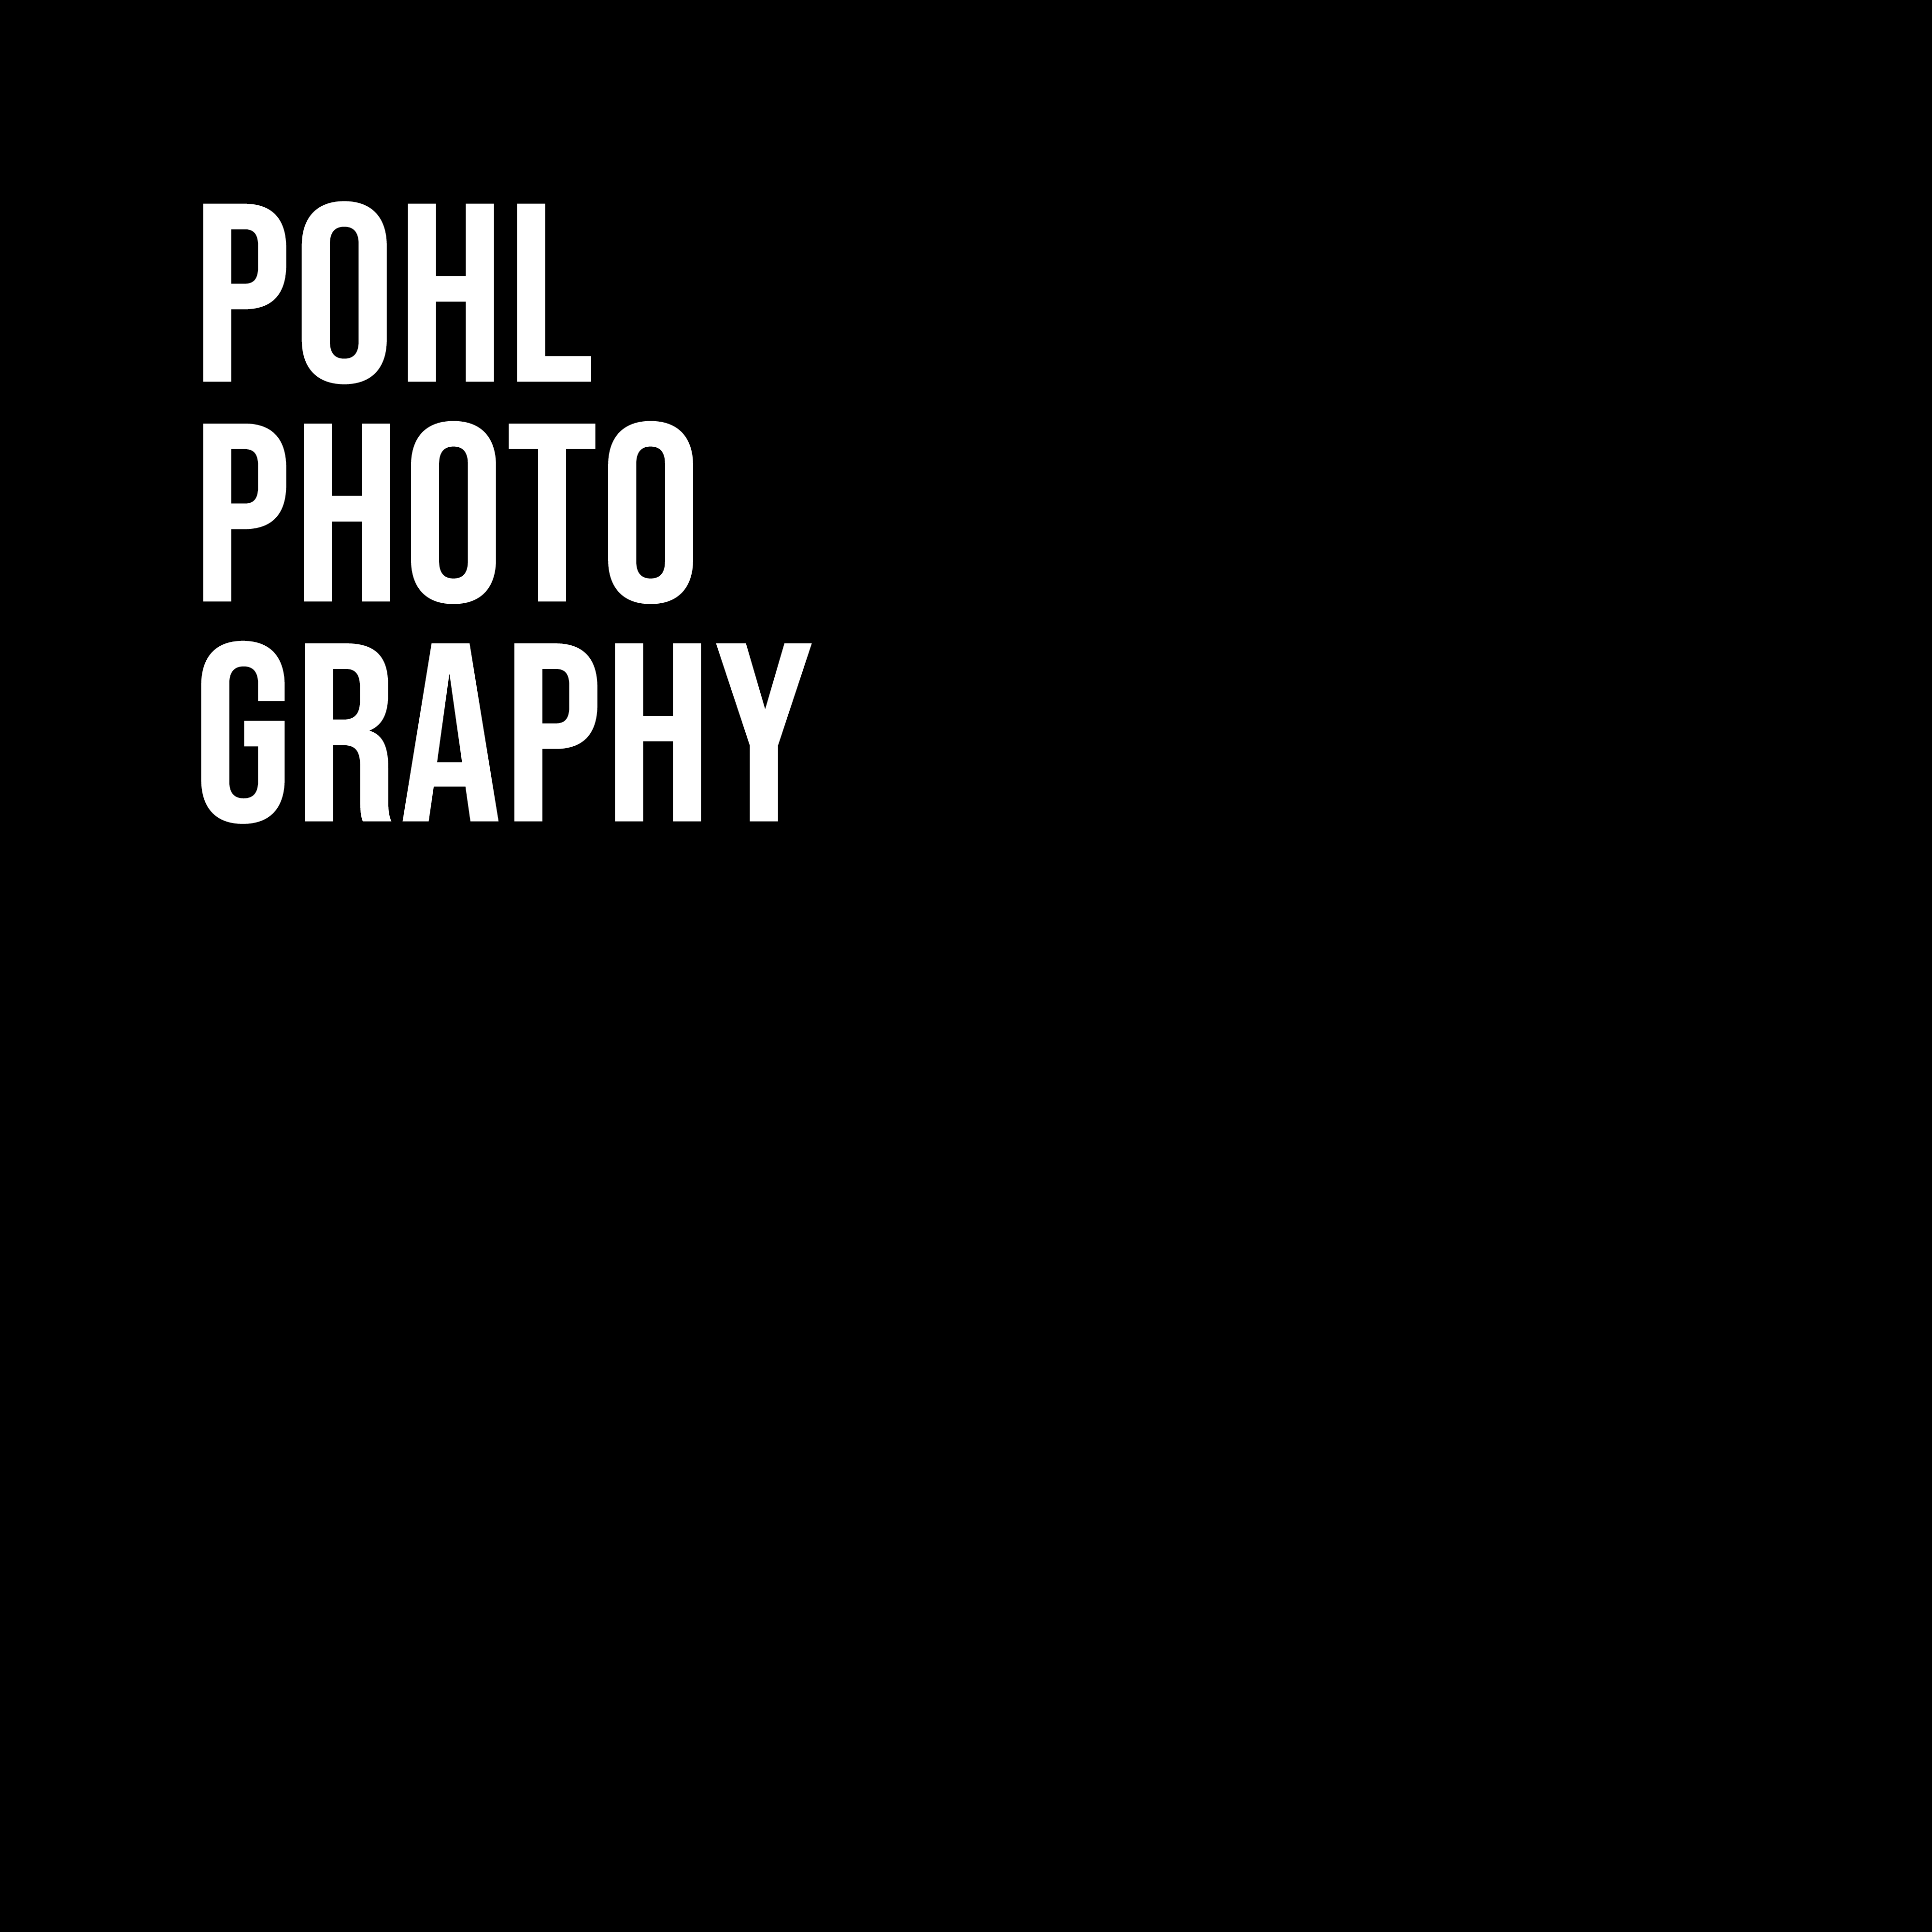 POHL PHOTO GRAPHY